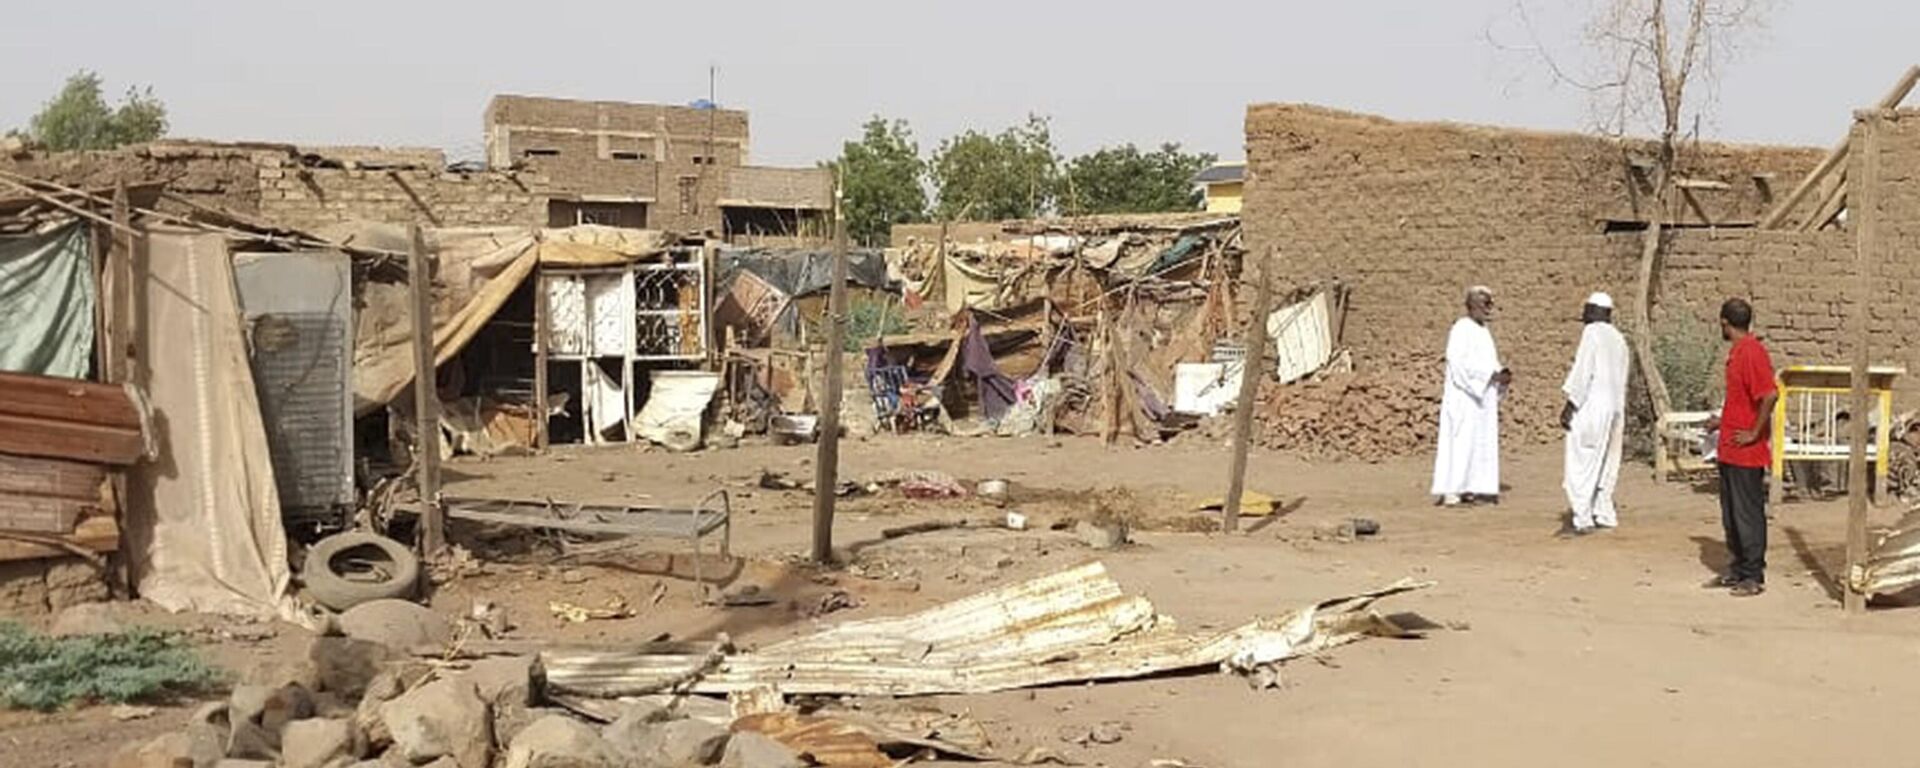 People check the rubble of their destroyed home after strikes at Allamat district in Khartoum, Sudan, Thursday, June 1, 2023. The White House says it's imposing sanctions against key defense companies and people who “perpetuate violence” in Sudan as the warring sides fail to abide by a cease-fire agreement in the northeastern African nation.  - Sputnik Africa, 1920, 18.06.2023